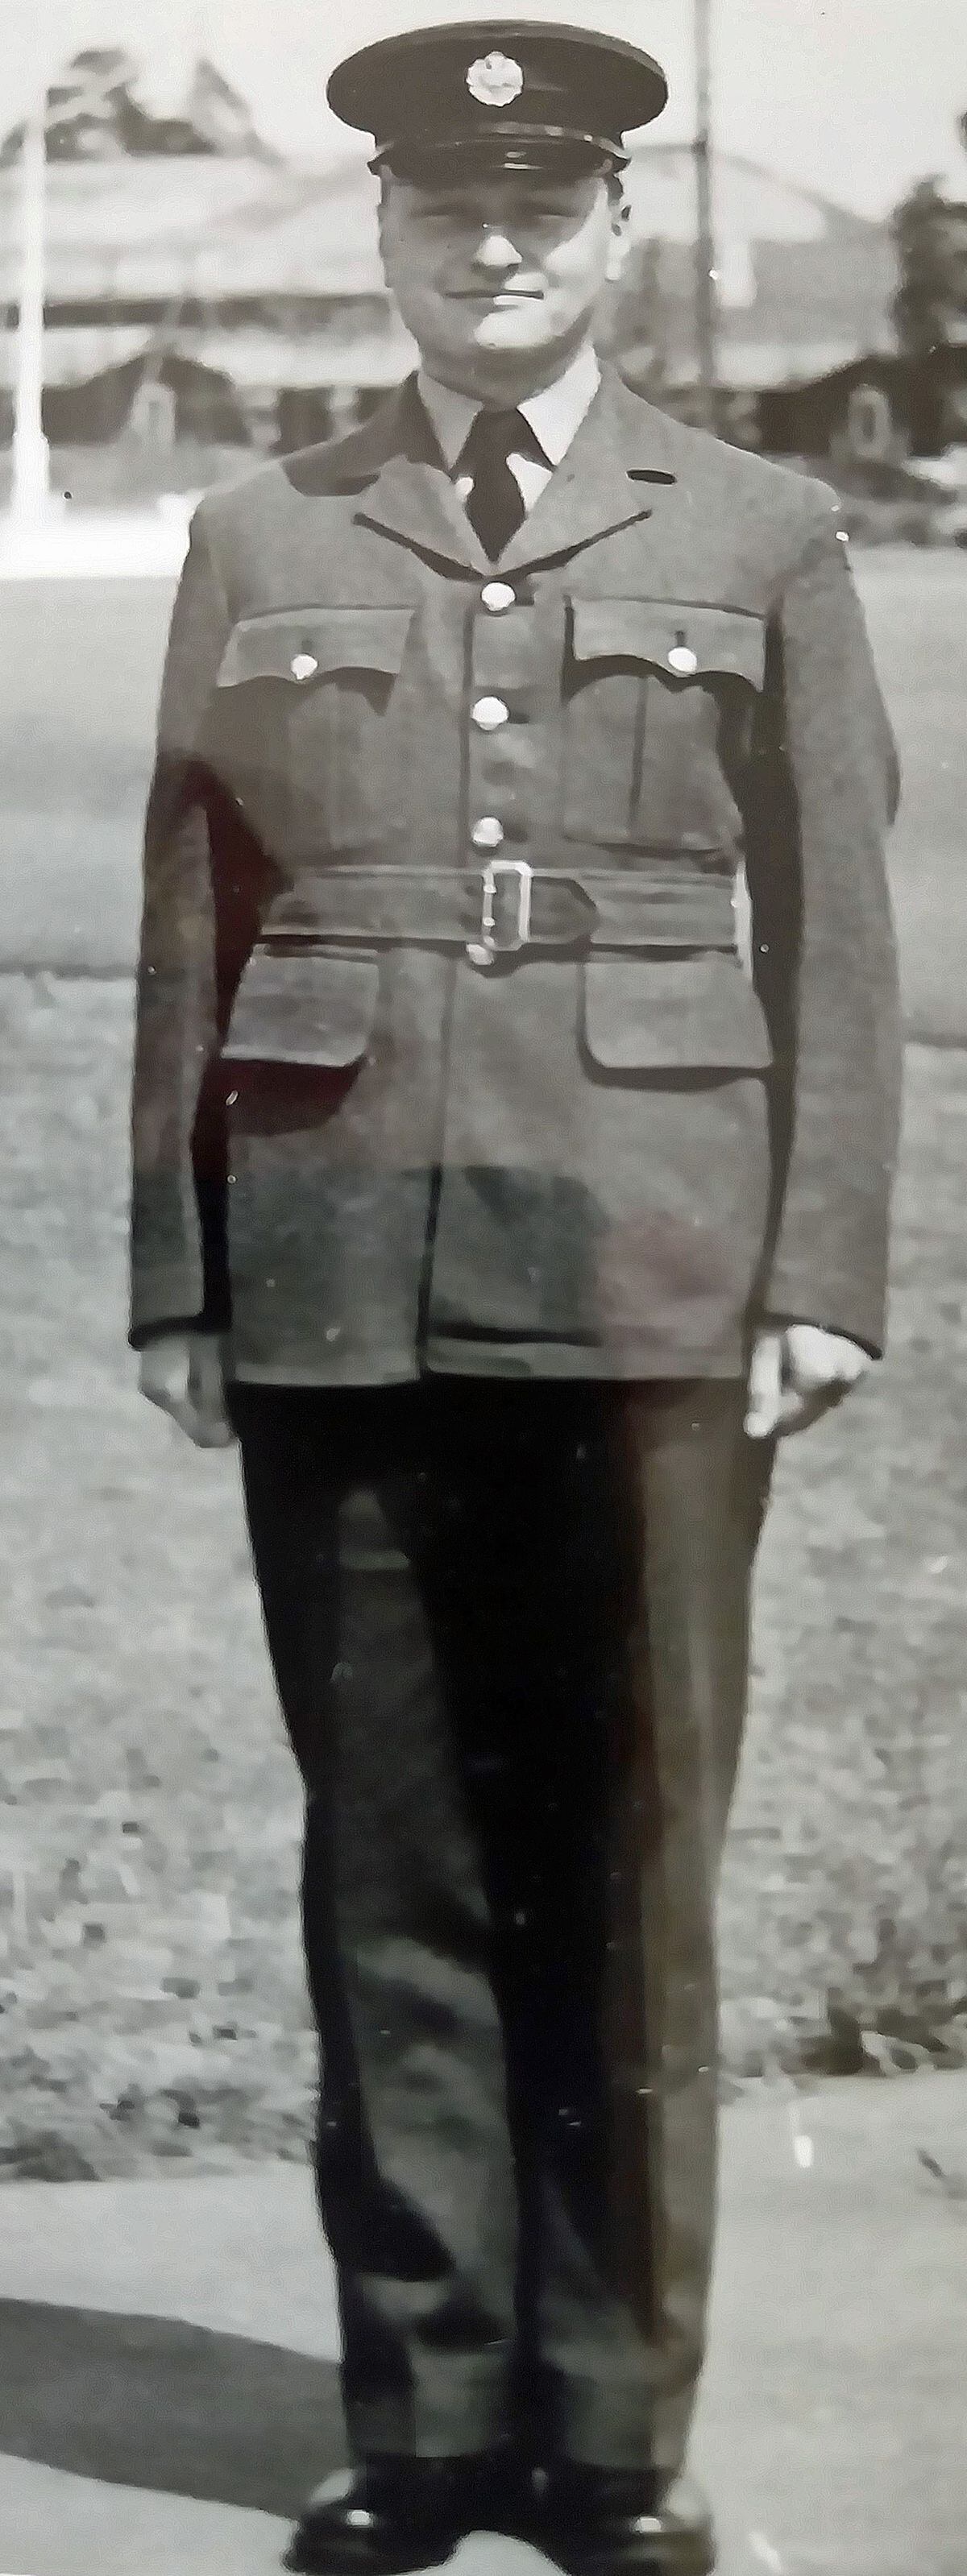 Peter during his National Service with the RAF.